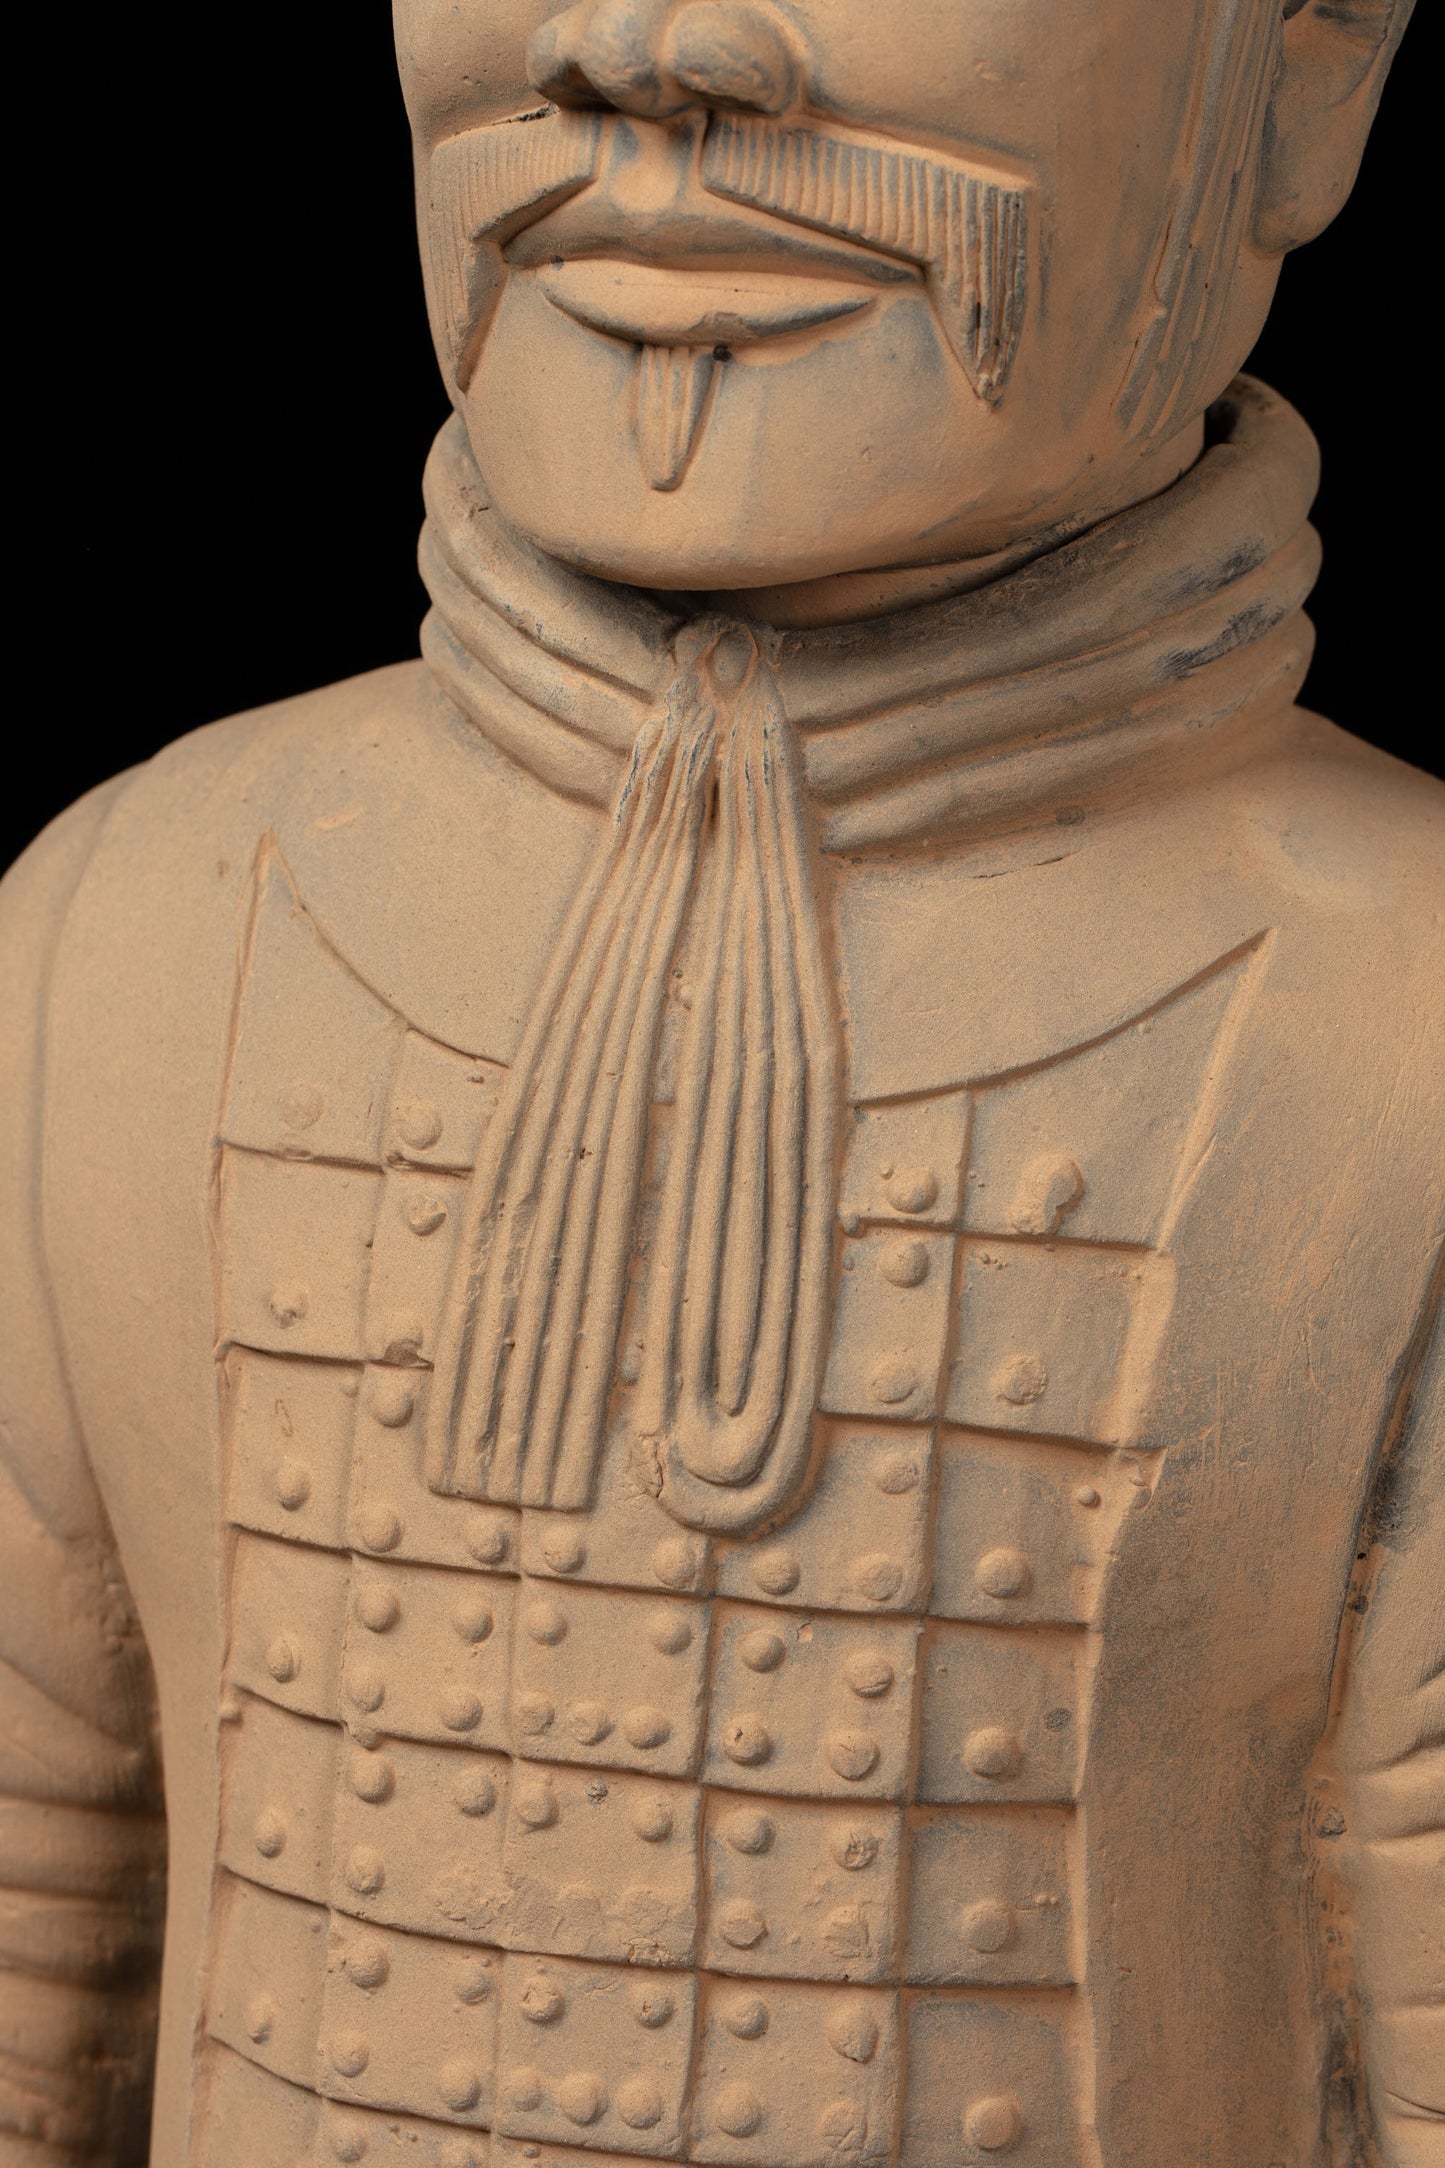 70CM Officier - CLAYARMY-Close-up view of the intricate facial details and expression of the 70CM Officer.